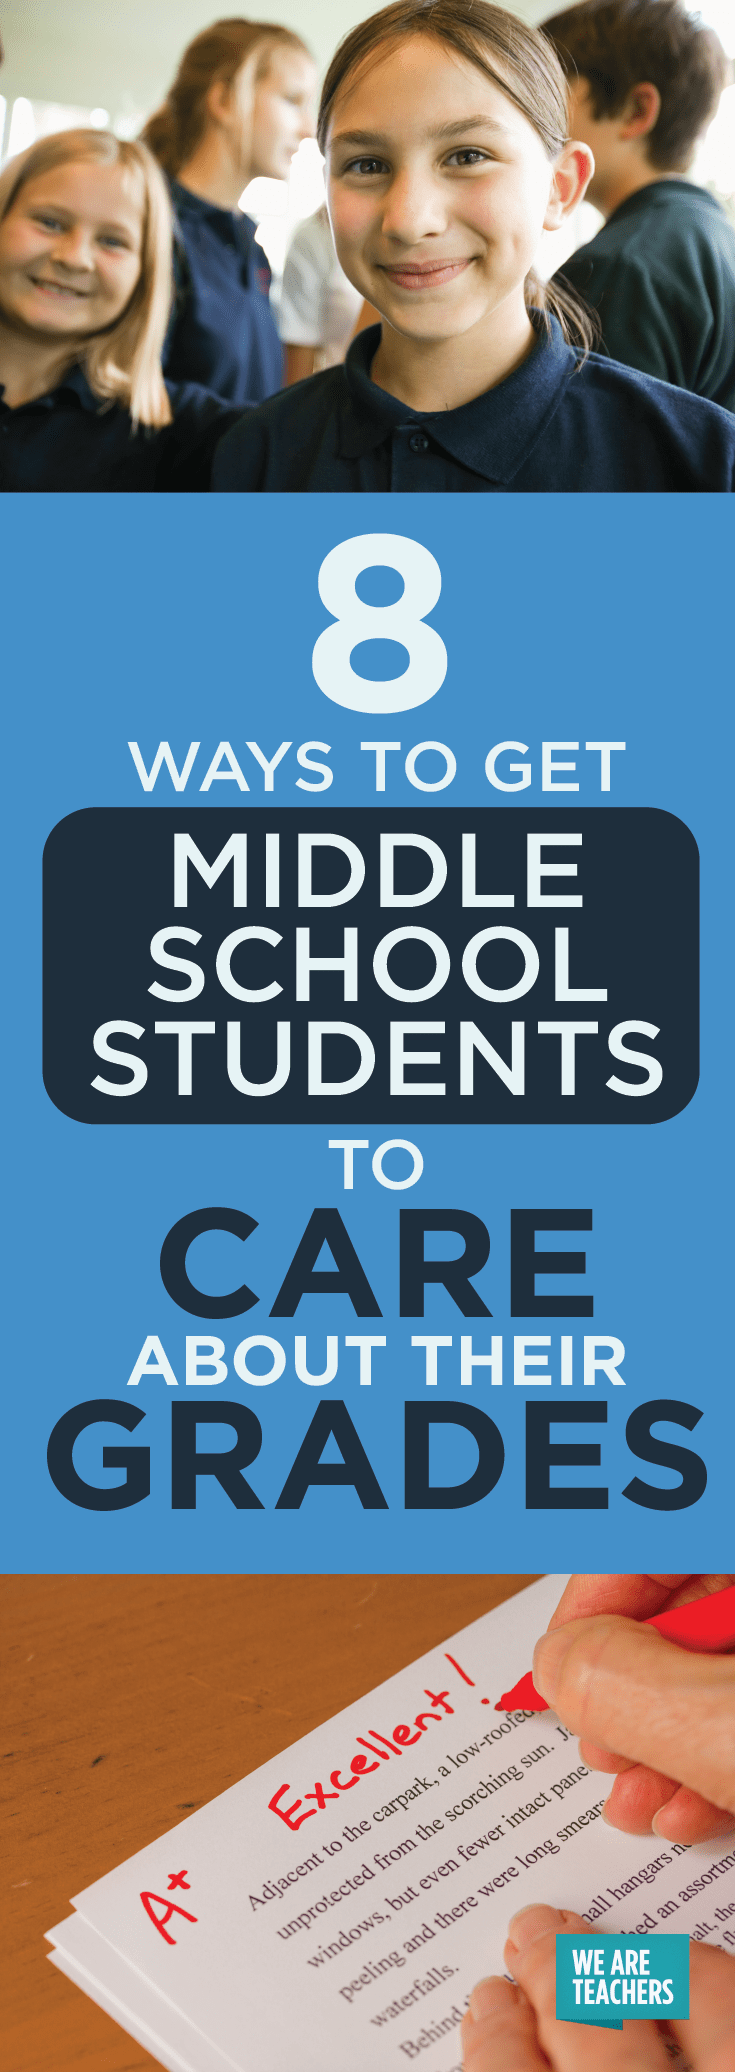 8 ways to get middle school students to care about their grades